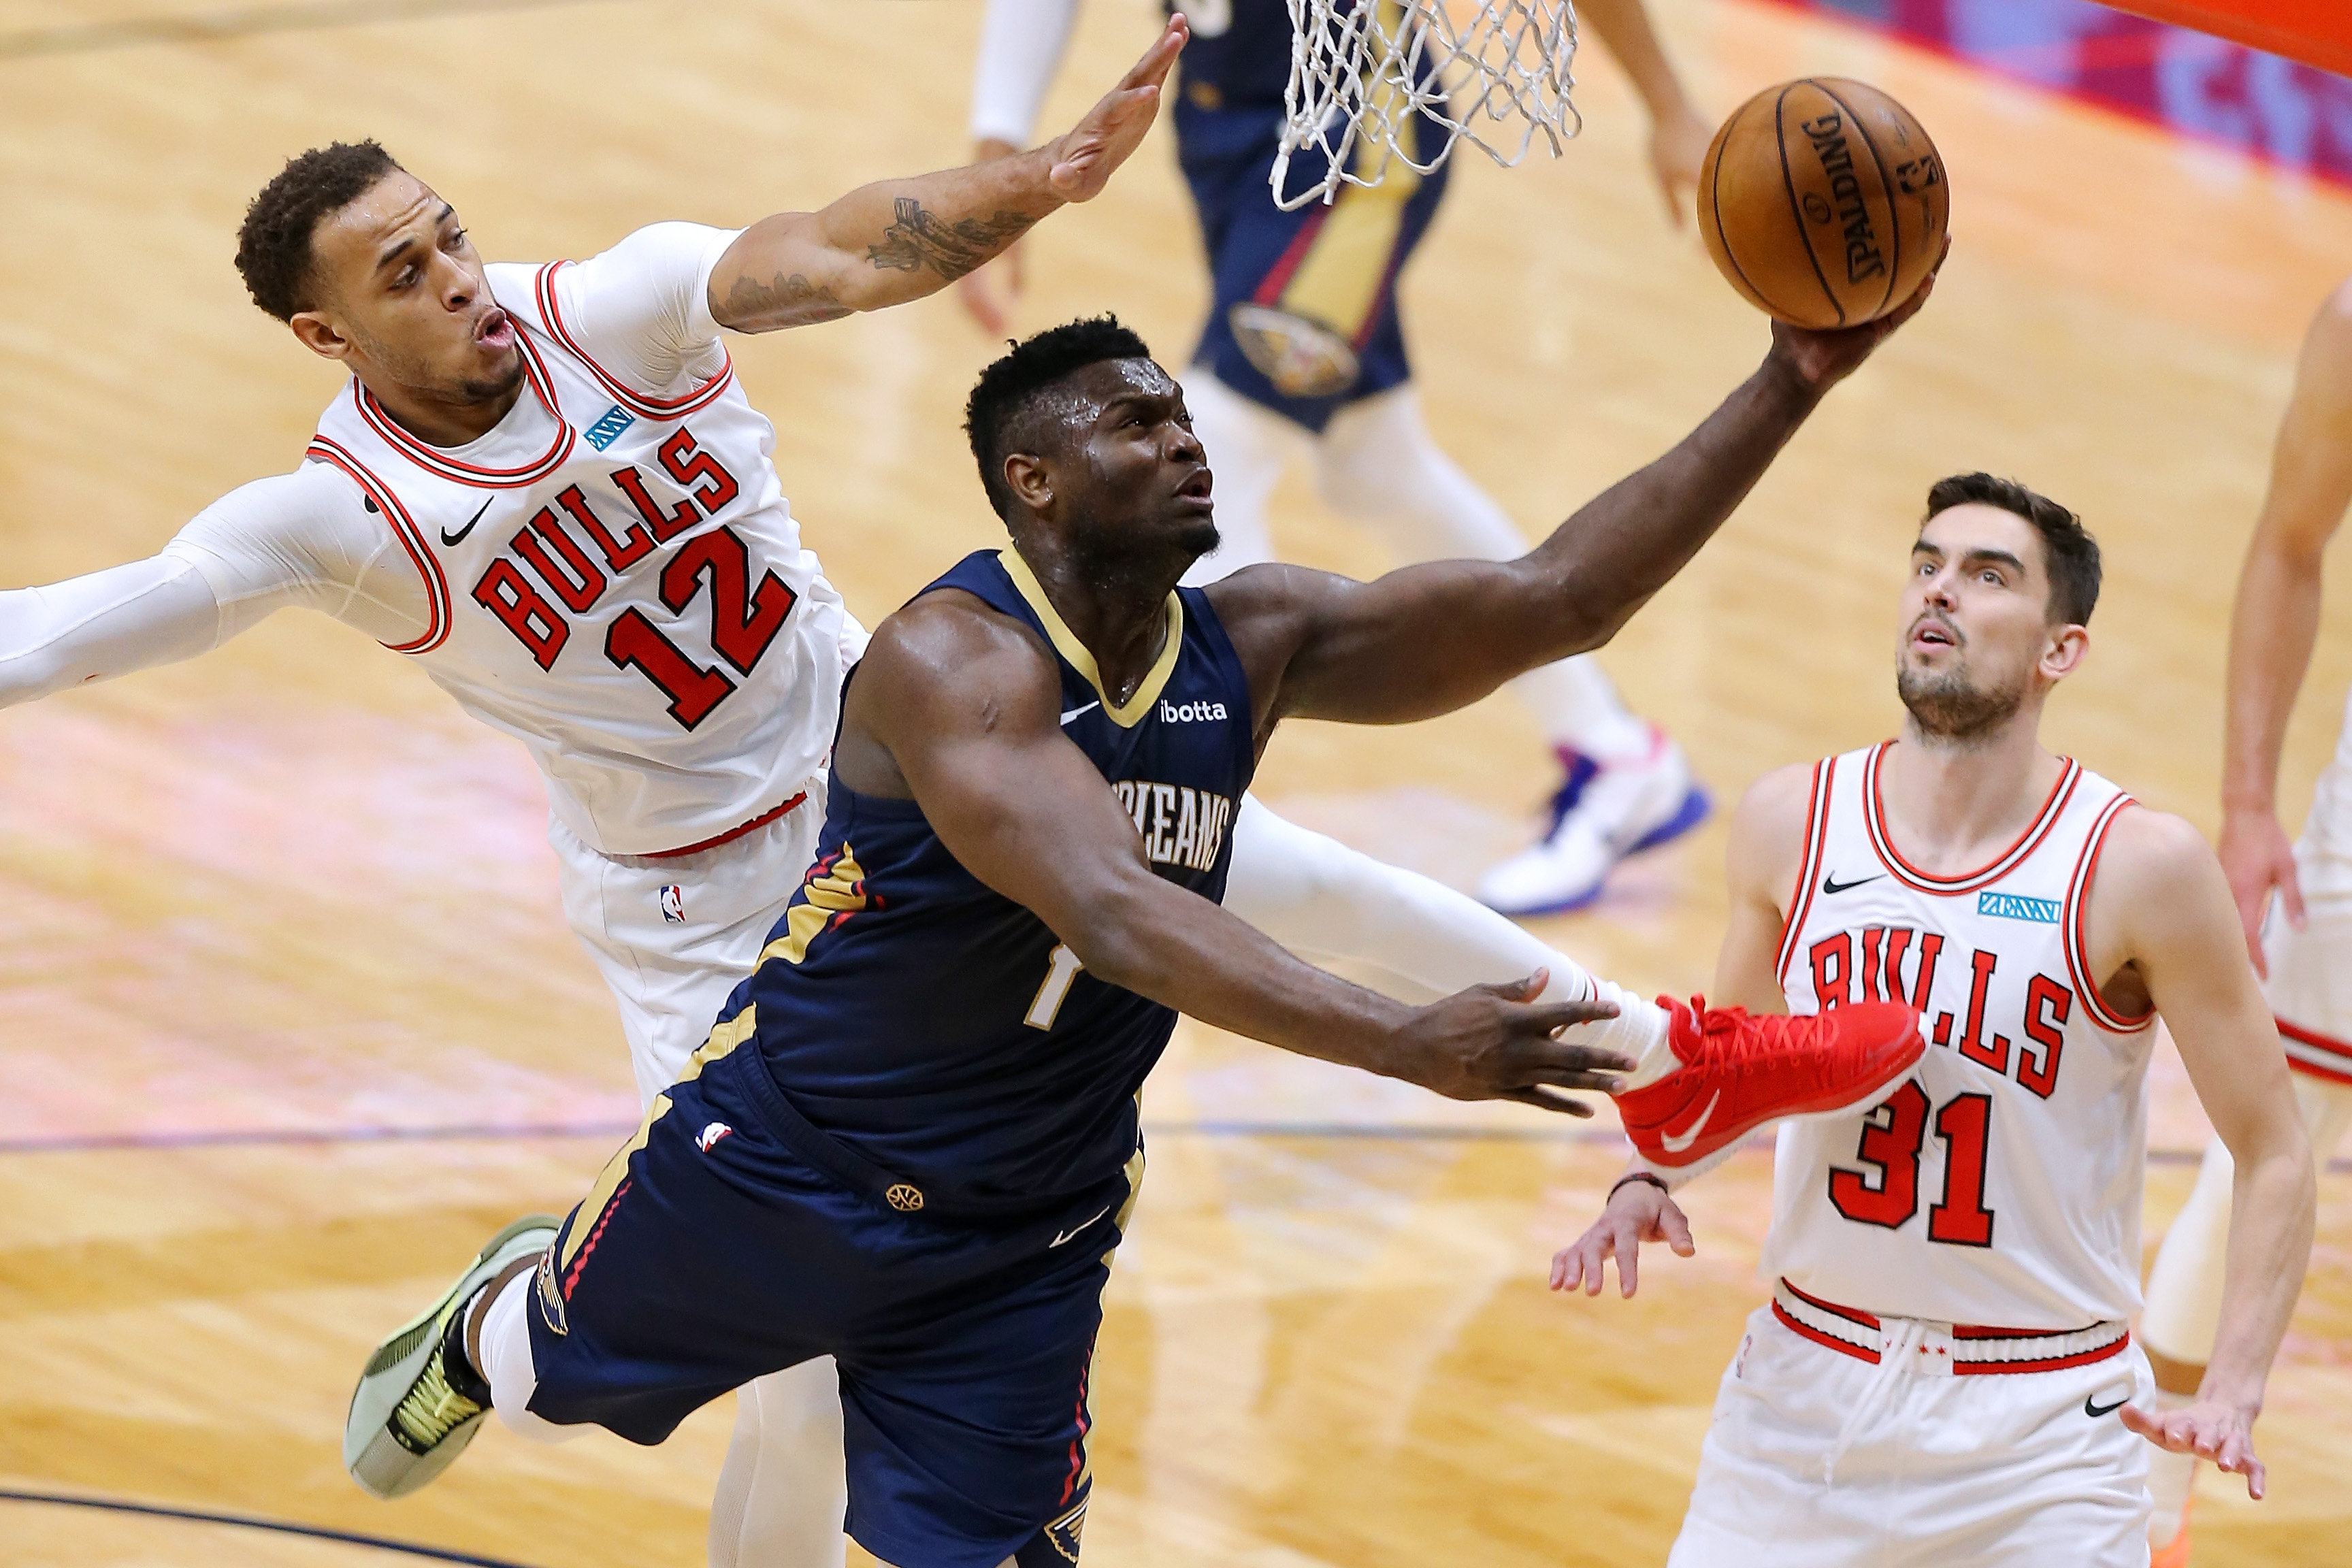 Pelicans star Zion Williamson drives to the rim during a game against the Chicago Bulls in March